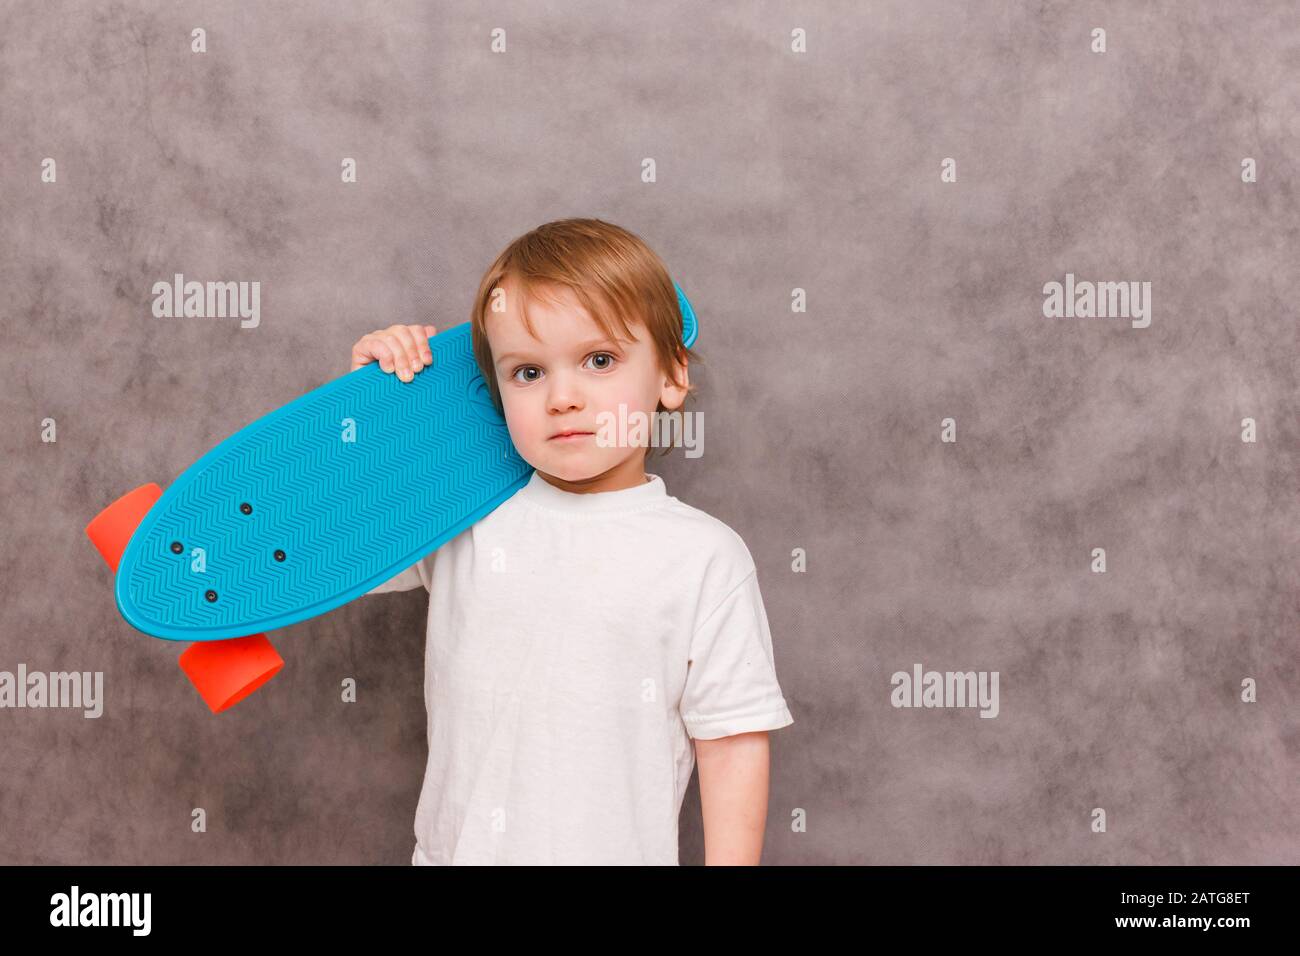 Little boy wearing a casual outfit, hold his skateboard on his shoulder,standing on a gray background. sale concept sports equipment Stock Photo